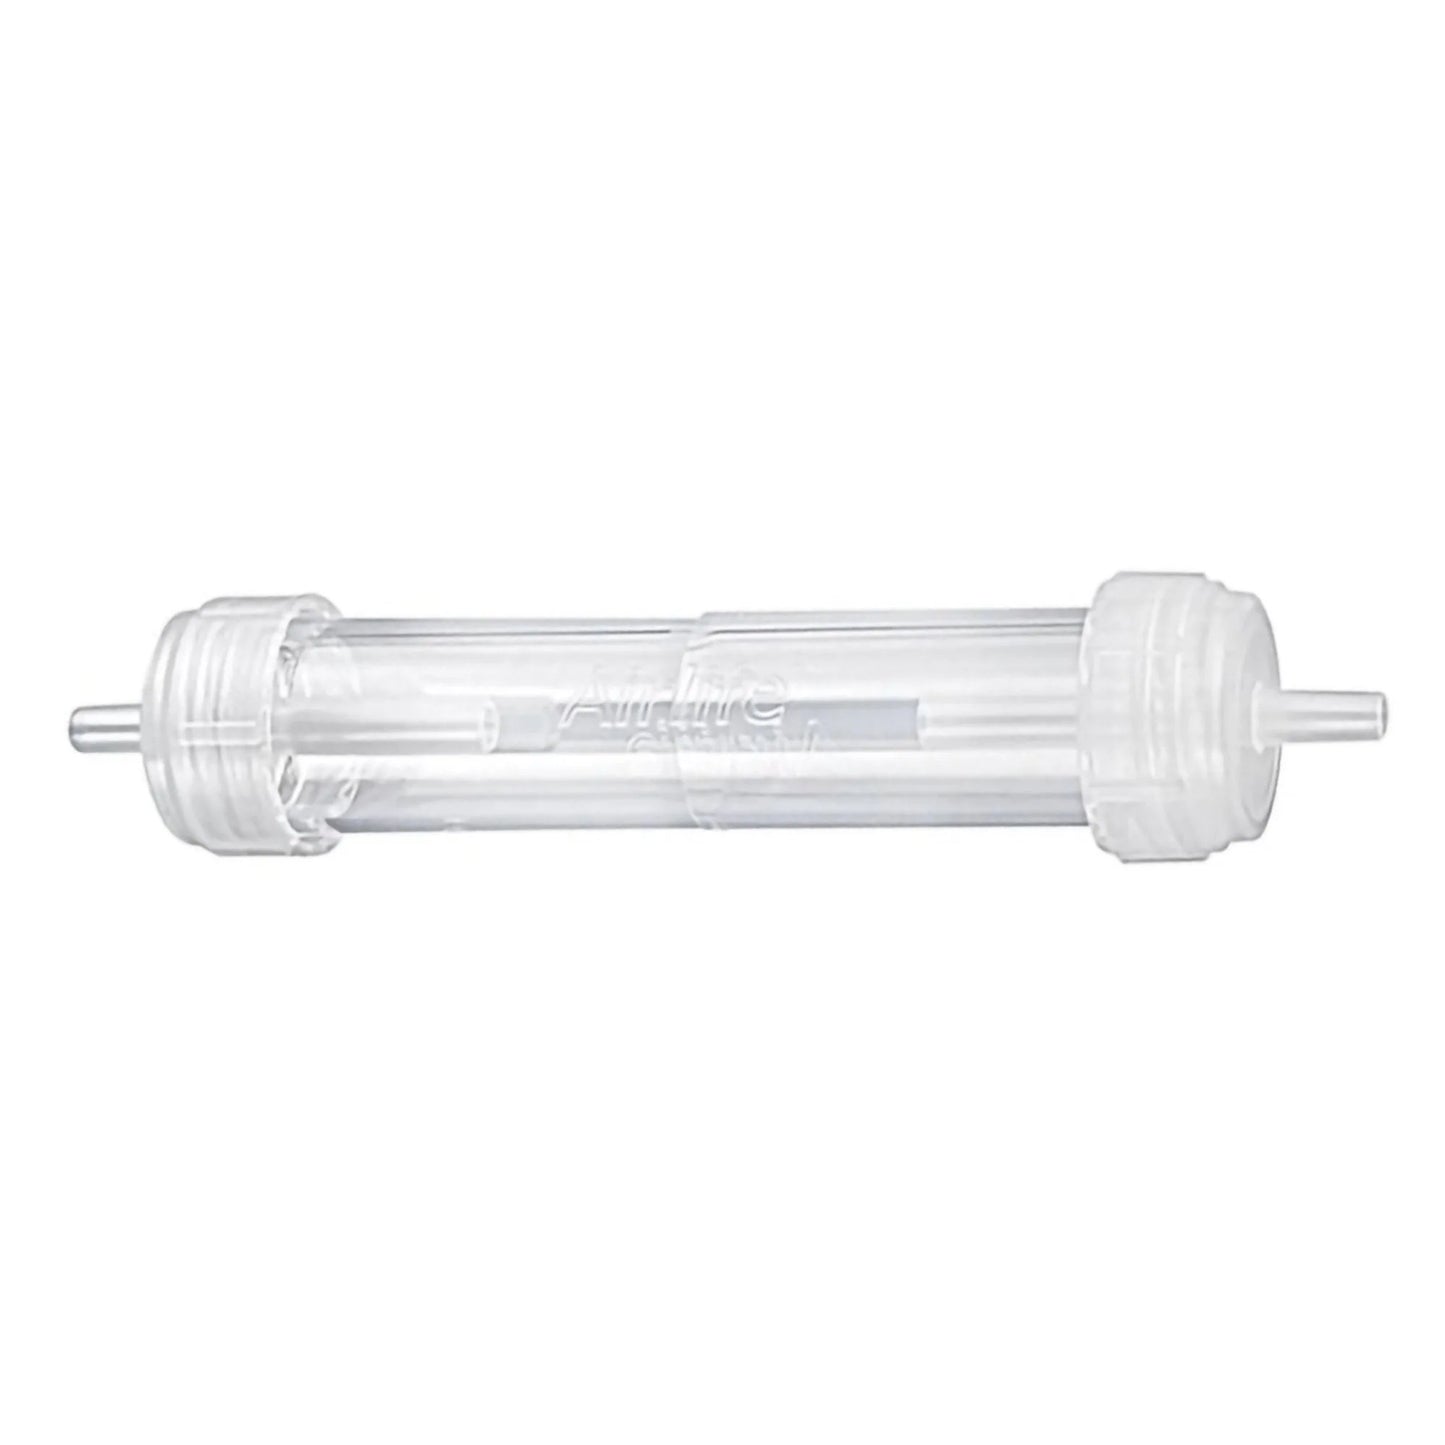 Vyaire Medical Oxygen Tubing In-Line Water Trap AirLife